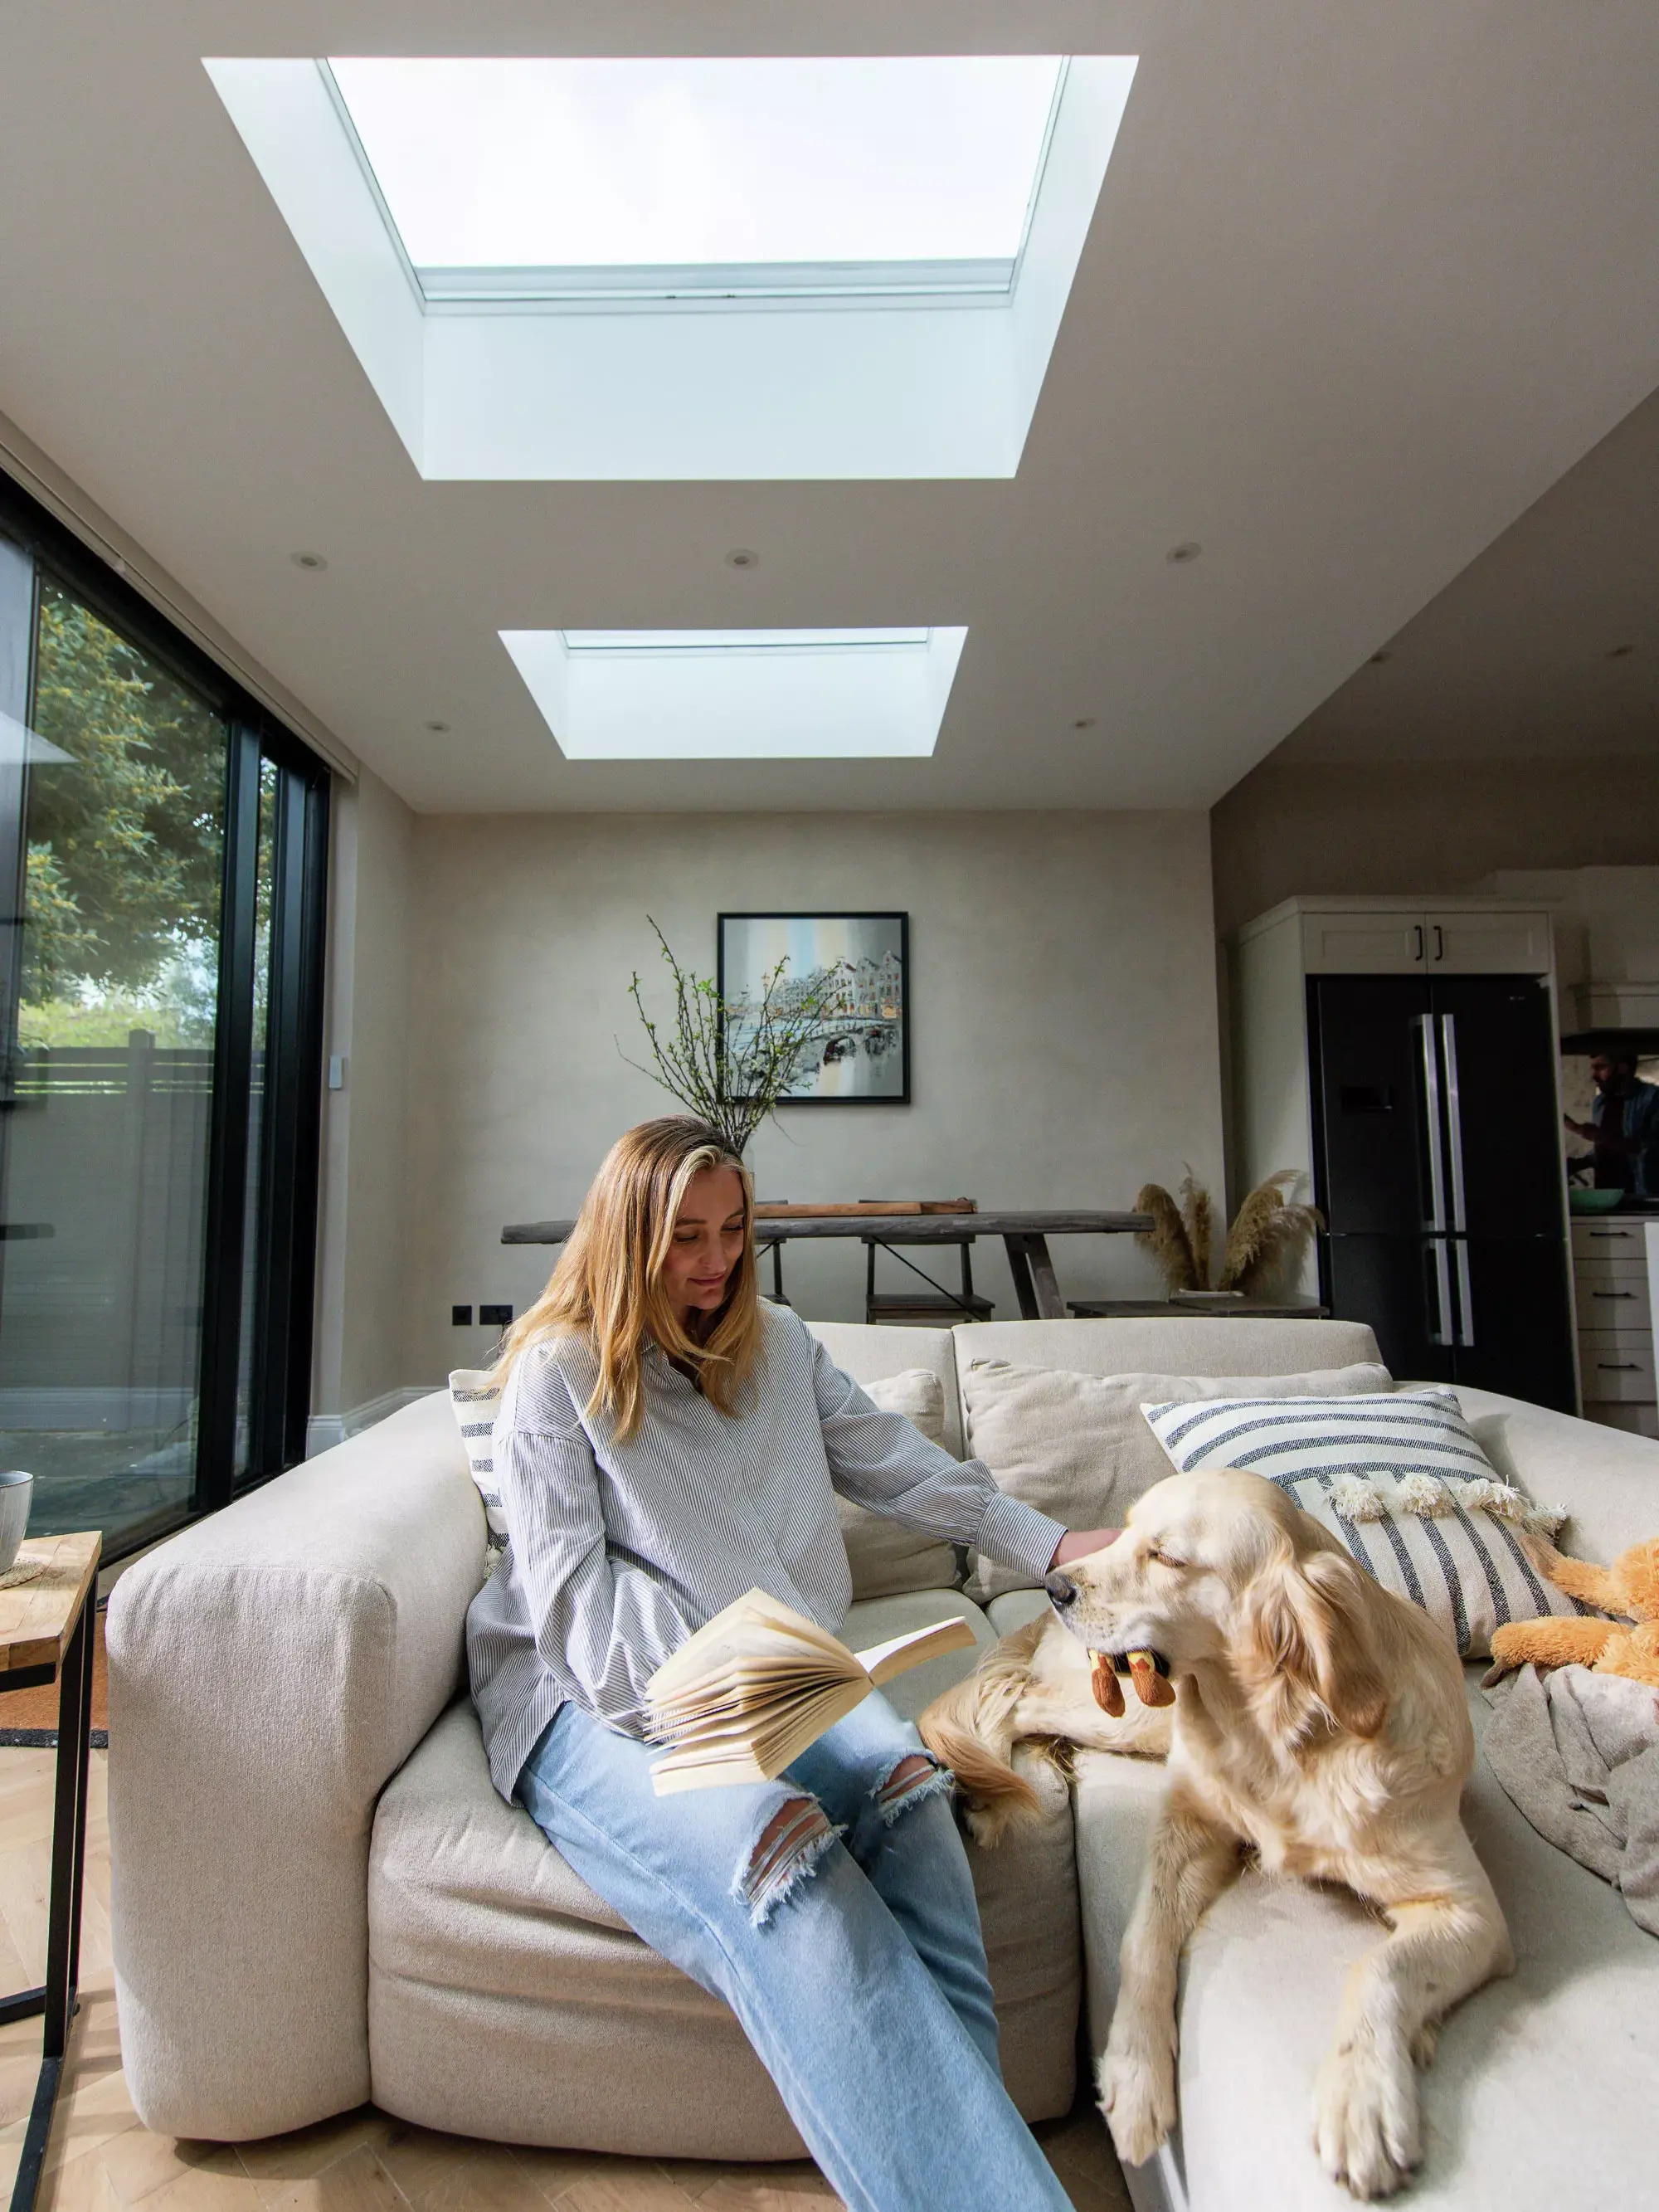 Home with VELUX flat roof window